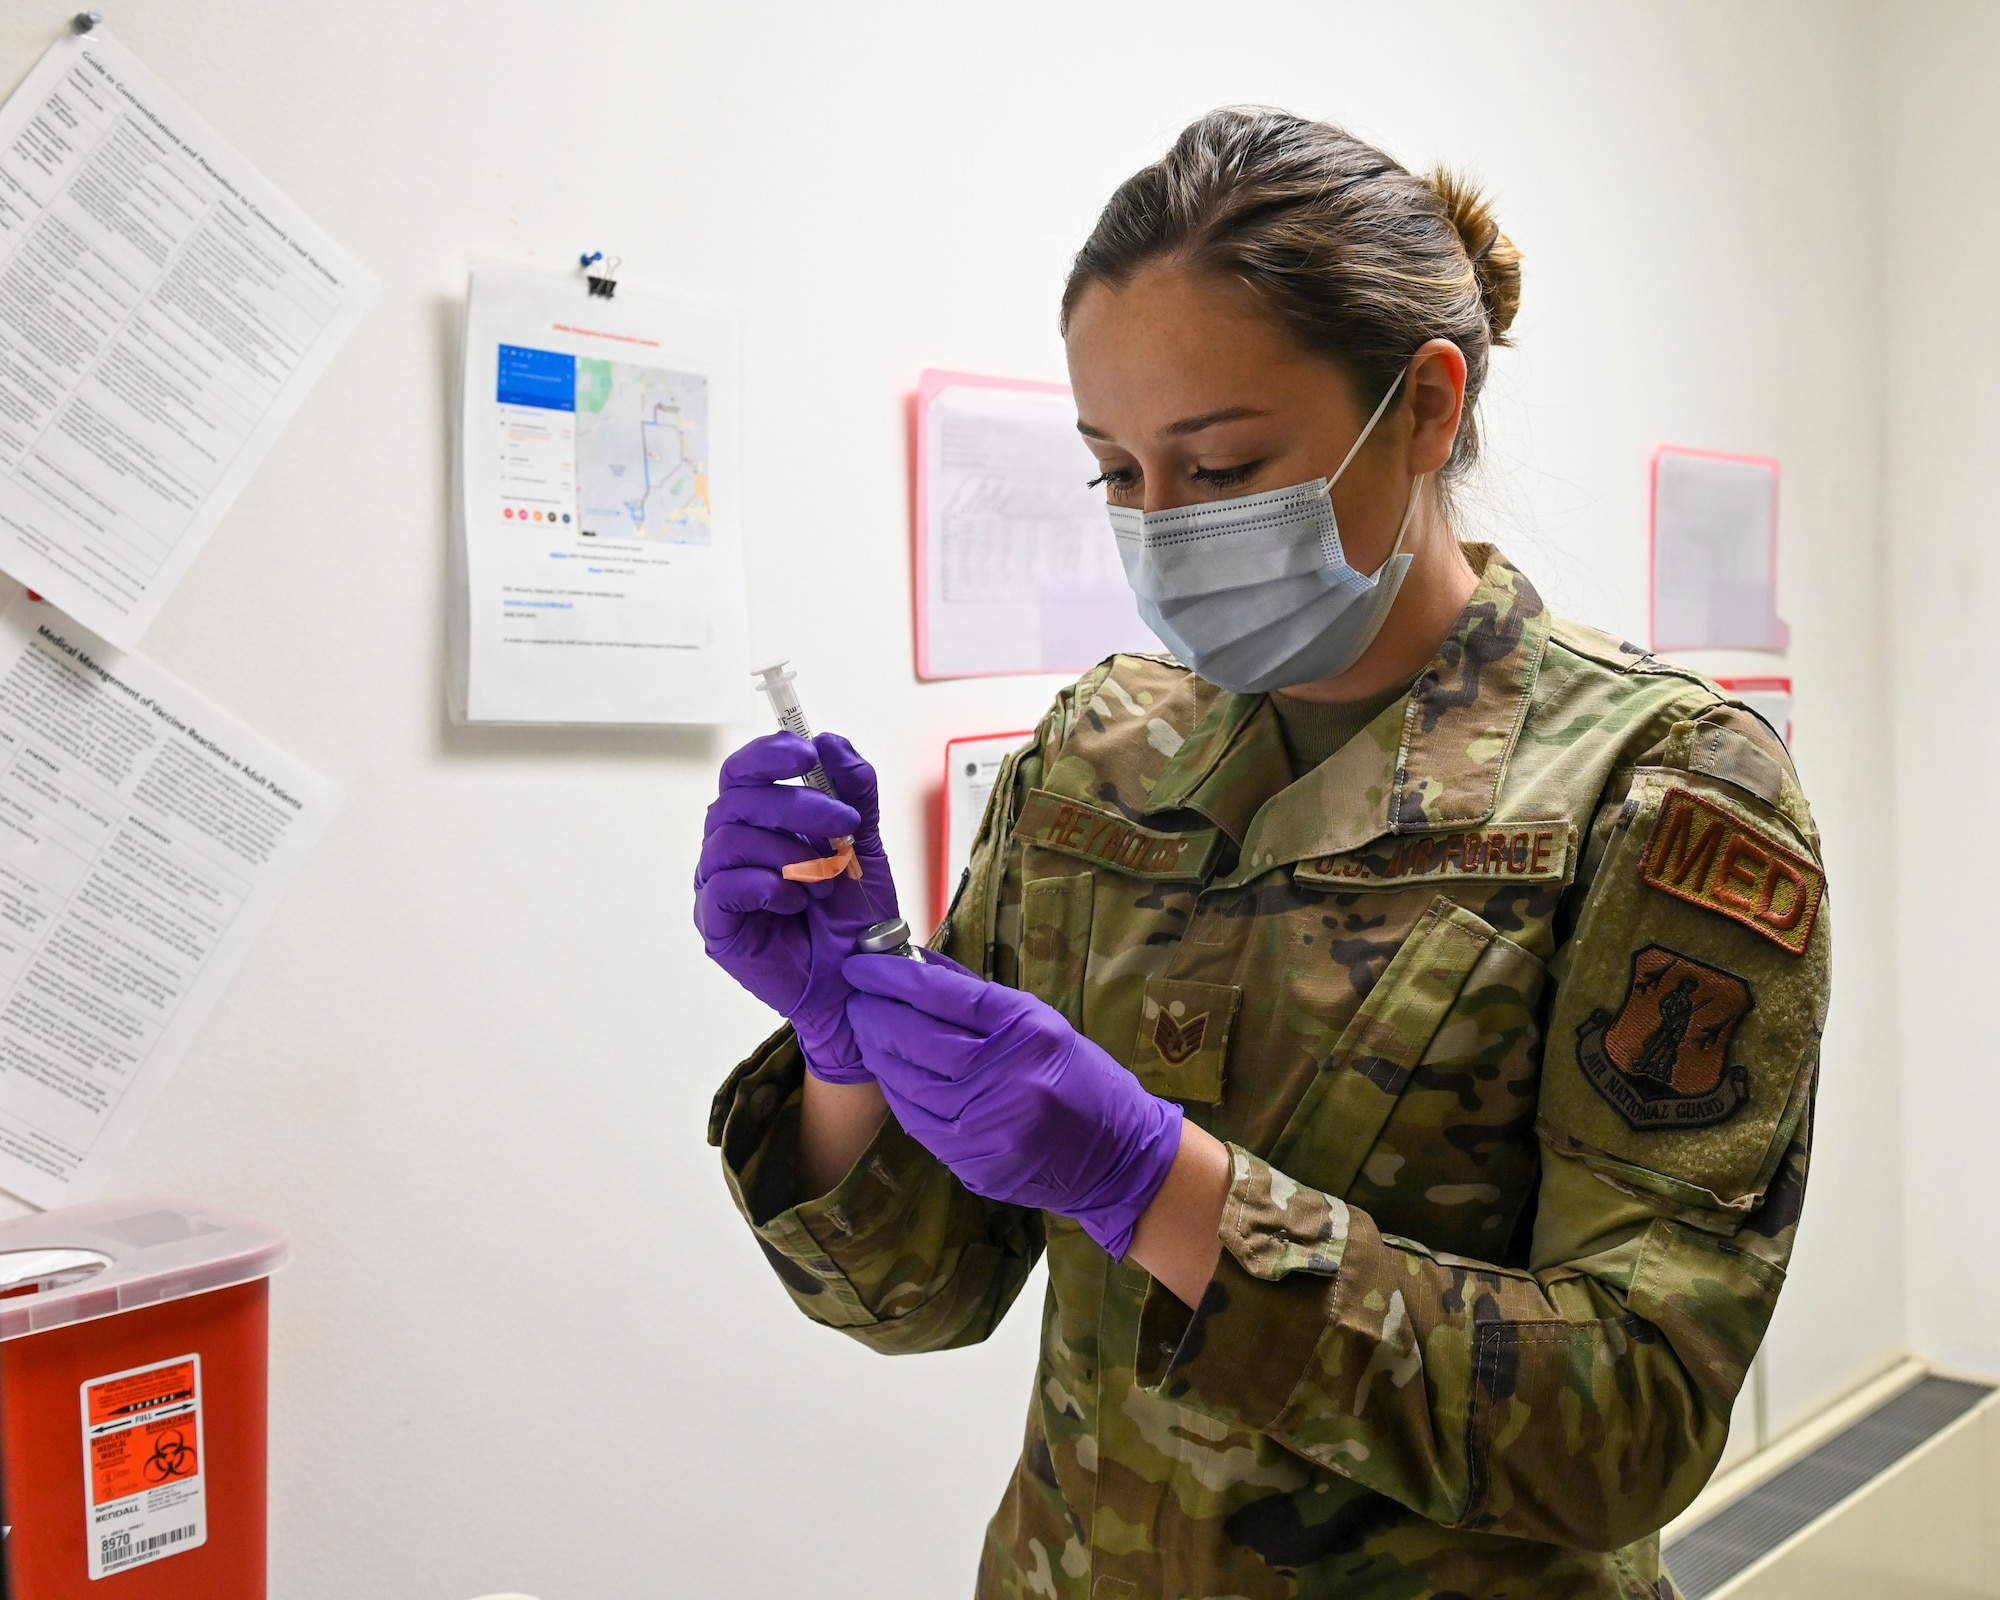 U.S. Air Force Staff Sgt. Brittany Reynolds, a medical technician assigned to the 115th Medical Group, Truax Field, Madison, Wis., prepares to administer the Moderna COVID-19 Vaccine to 115th Fighter Wing members who are slated to receive the Moderna COVID-19 Vaccine January 6, 2021. The 115th Fighter Wing has recently made the vaccine available to all members of the unit on a first come, first served basis.  (U.S. Air National Guard photo by Senior Airman Cameron Lewis)